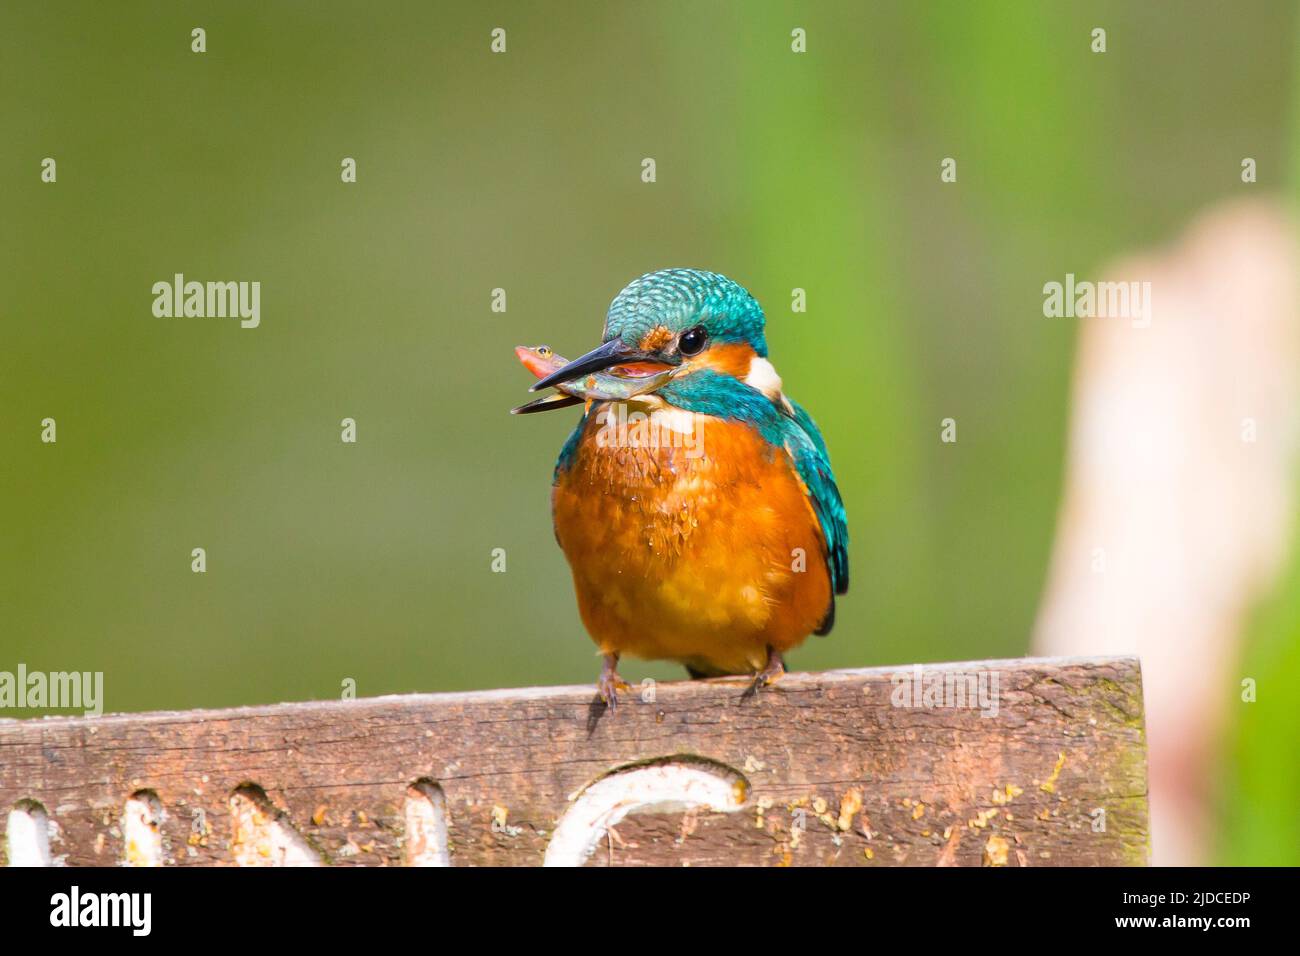 Kidderminster, UK. 20th June, 2022. UK weather: with bright sunny skies and warm temperatures, today is a pefect time for a little fishing. A brightly coloured kingfisher bird captures a fish in its bill and is perched on a post ready to eat its meal. Credit: Lee Hudson/Alamy Live News Stock Photo